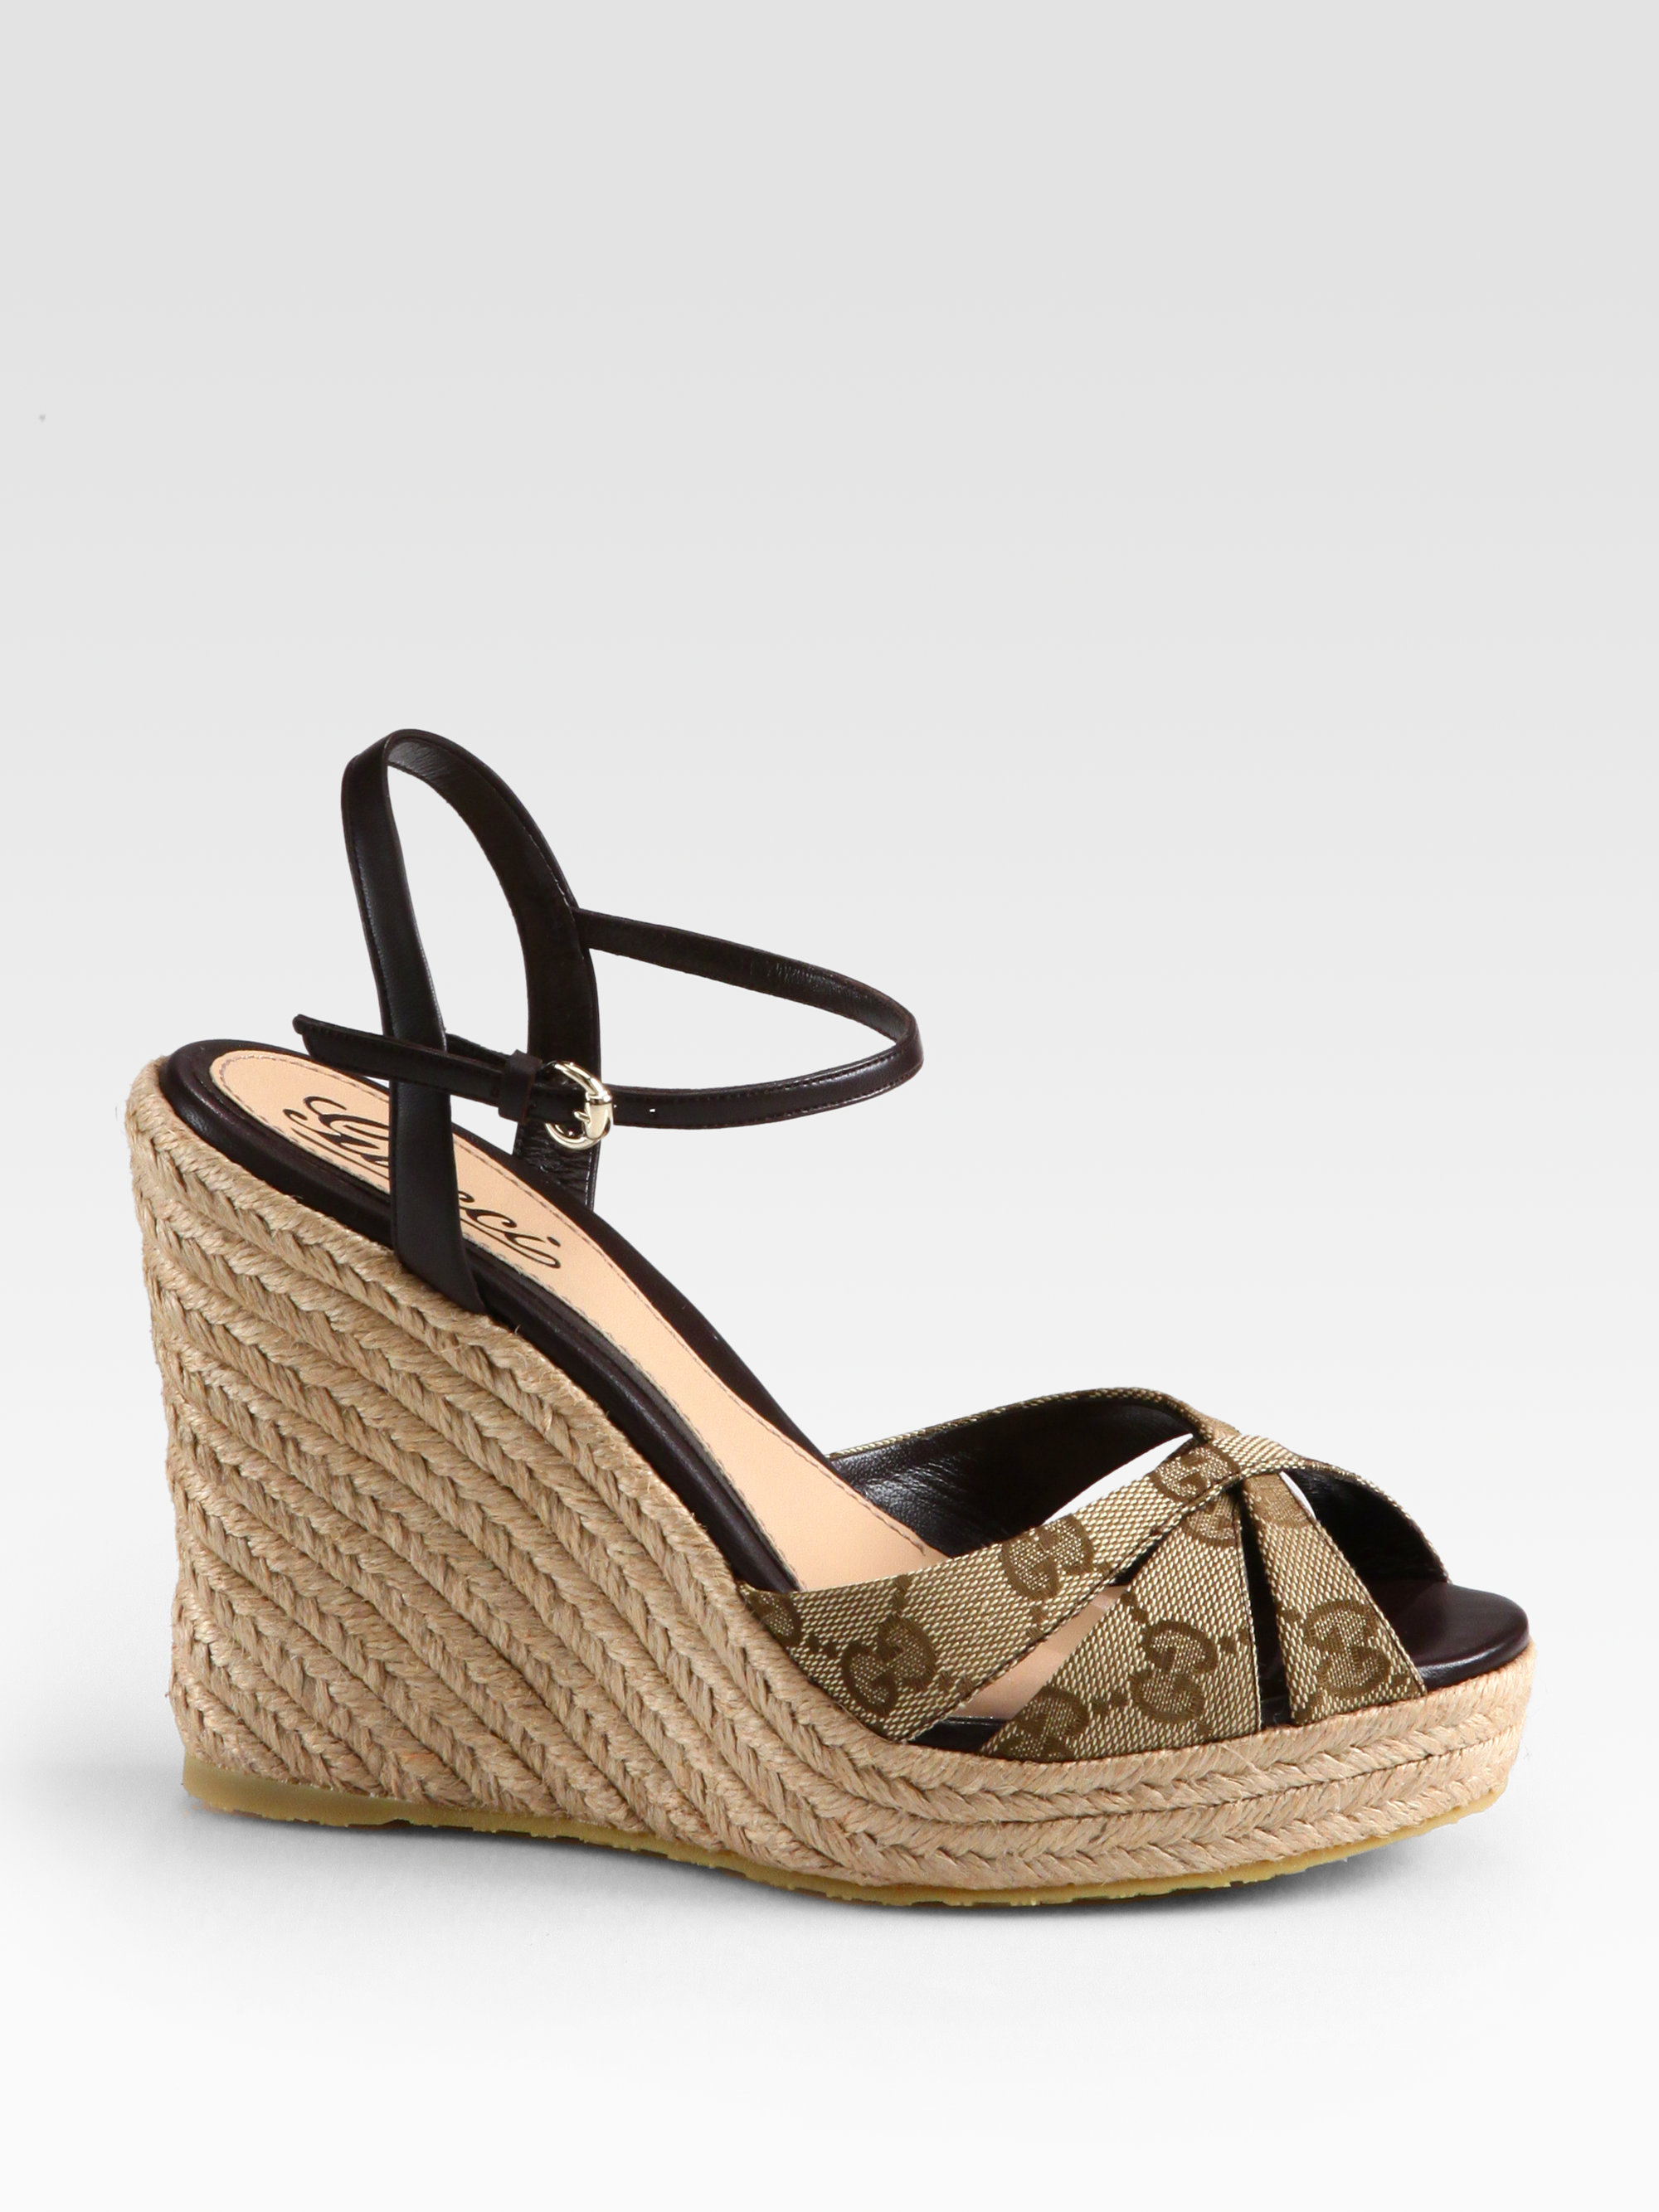 Gucci Penelope Gg Canvas Espadrille Wedges in Black | Lyst